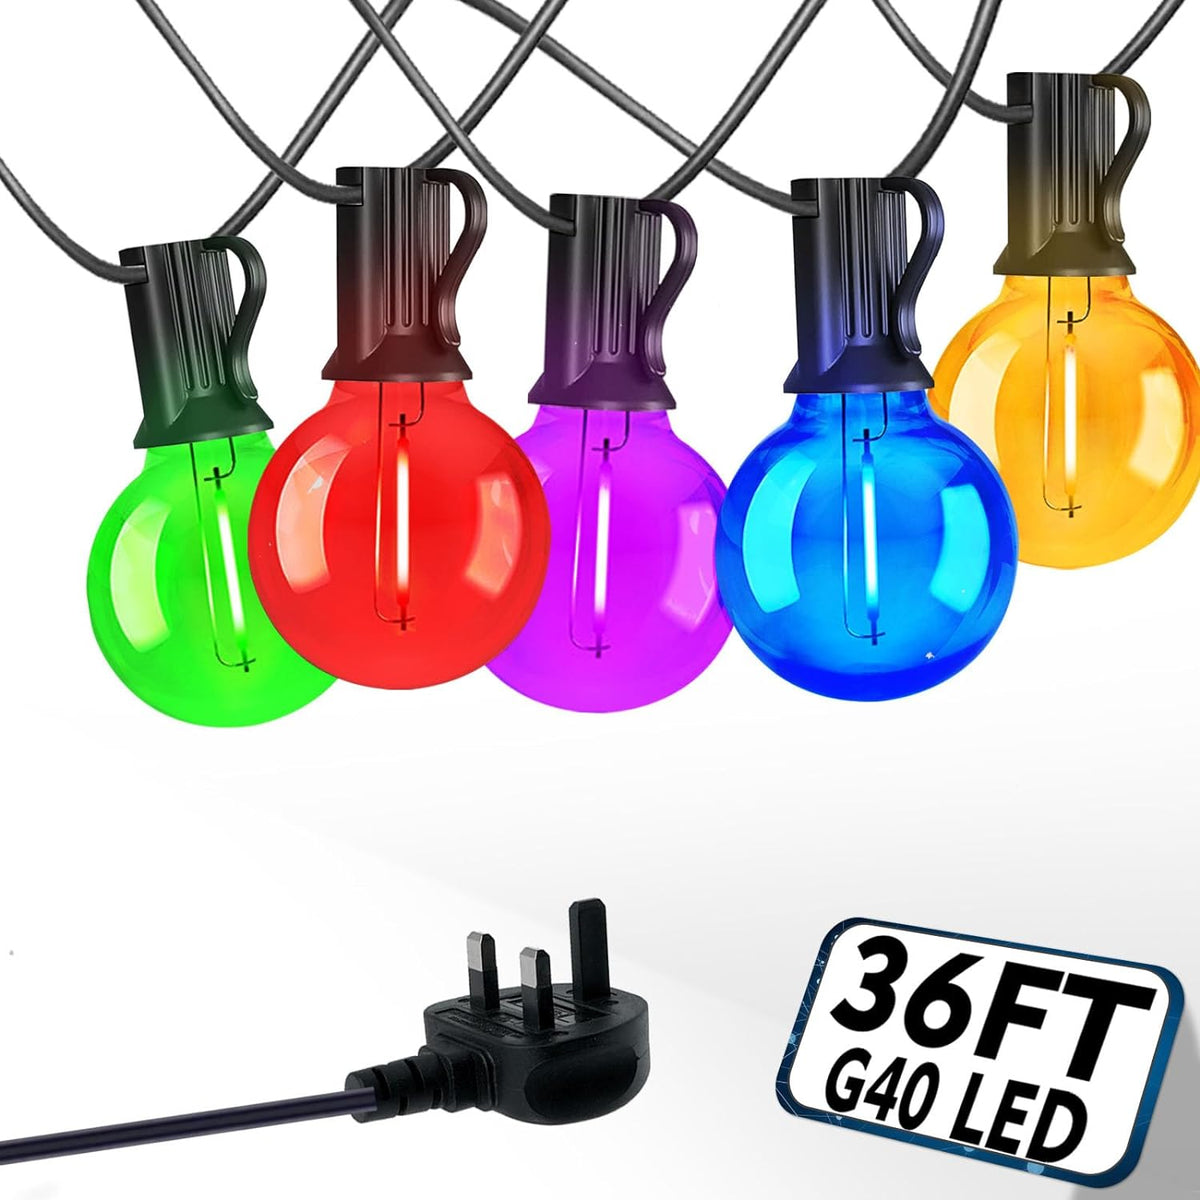 36FT G40 Coloured Garden Lights Mains Powered Energy Saving Shatterproof Waterproof Outdoor String Lights for Outside Gazebo Patio Balcony Party etc. [Energy Class E]